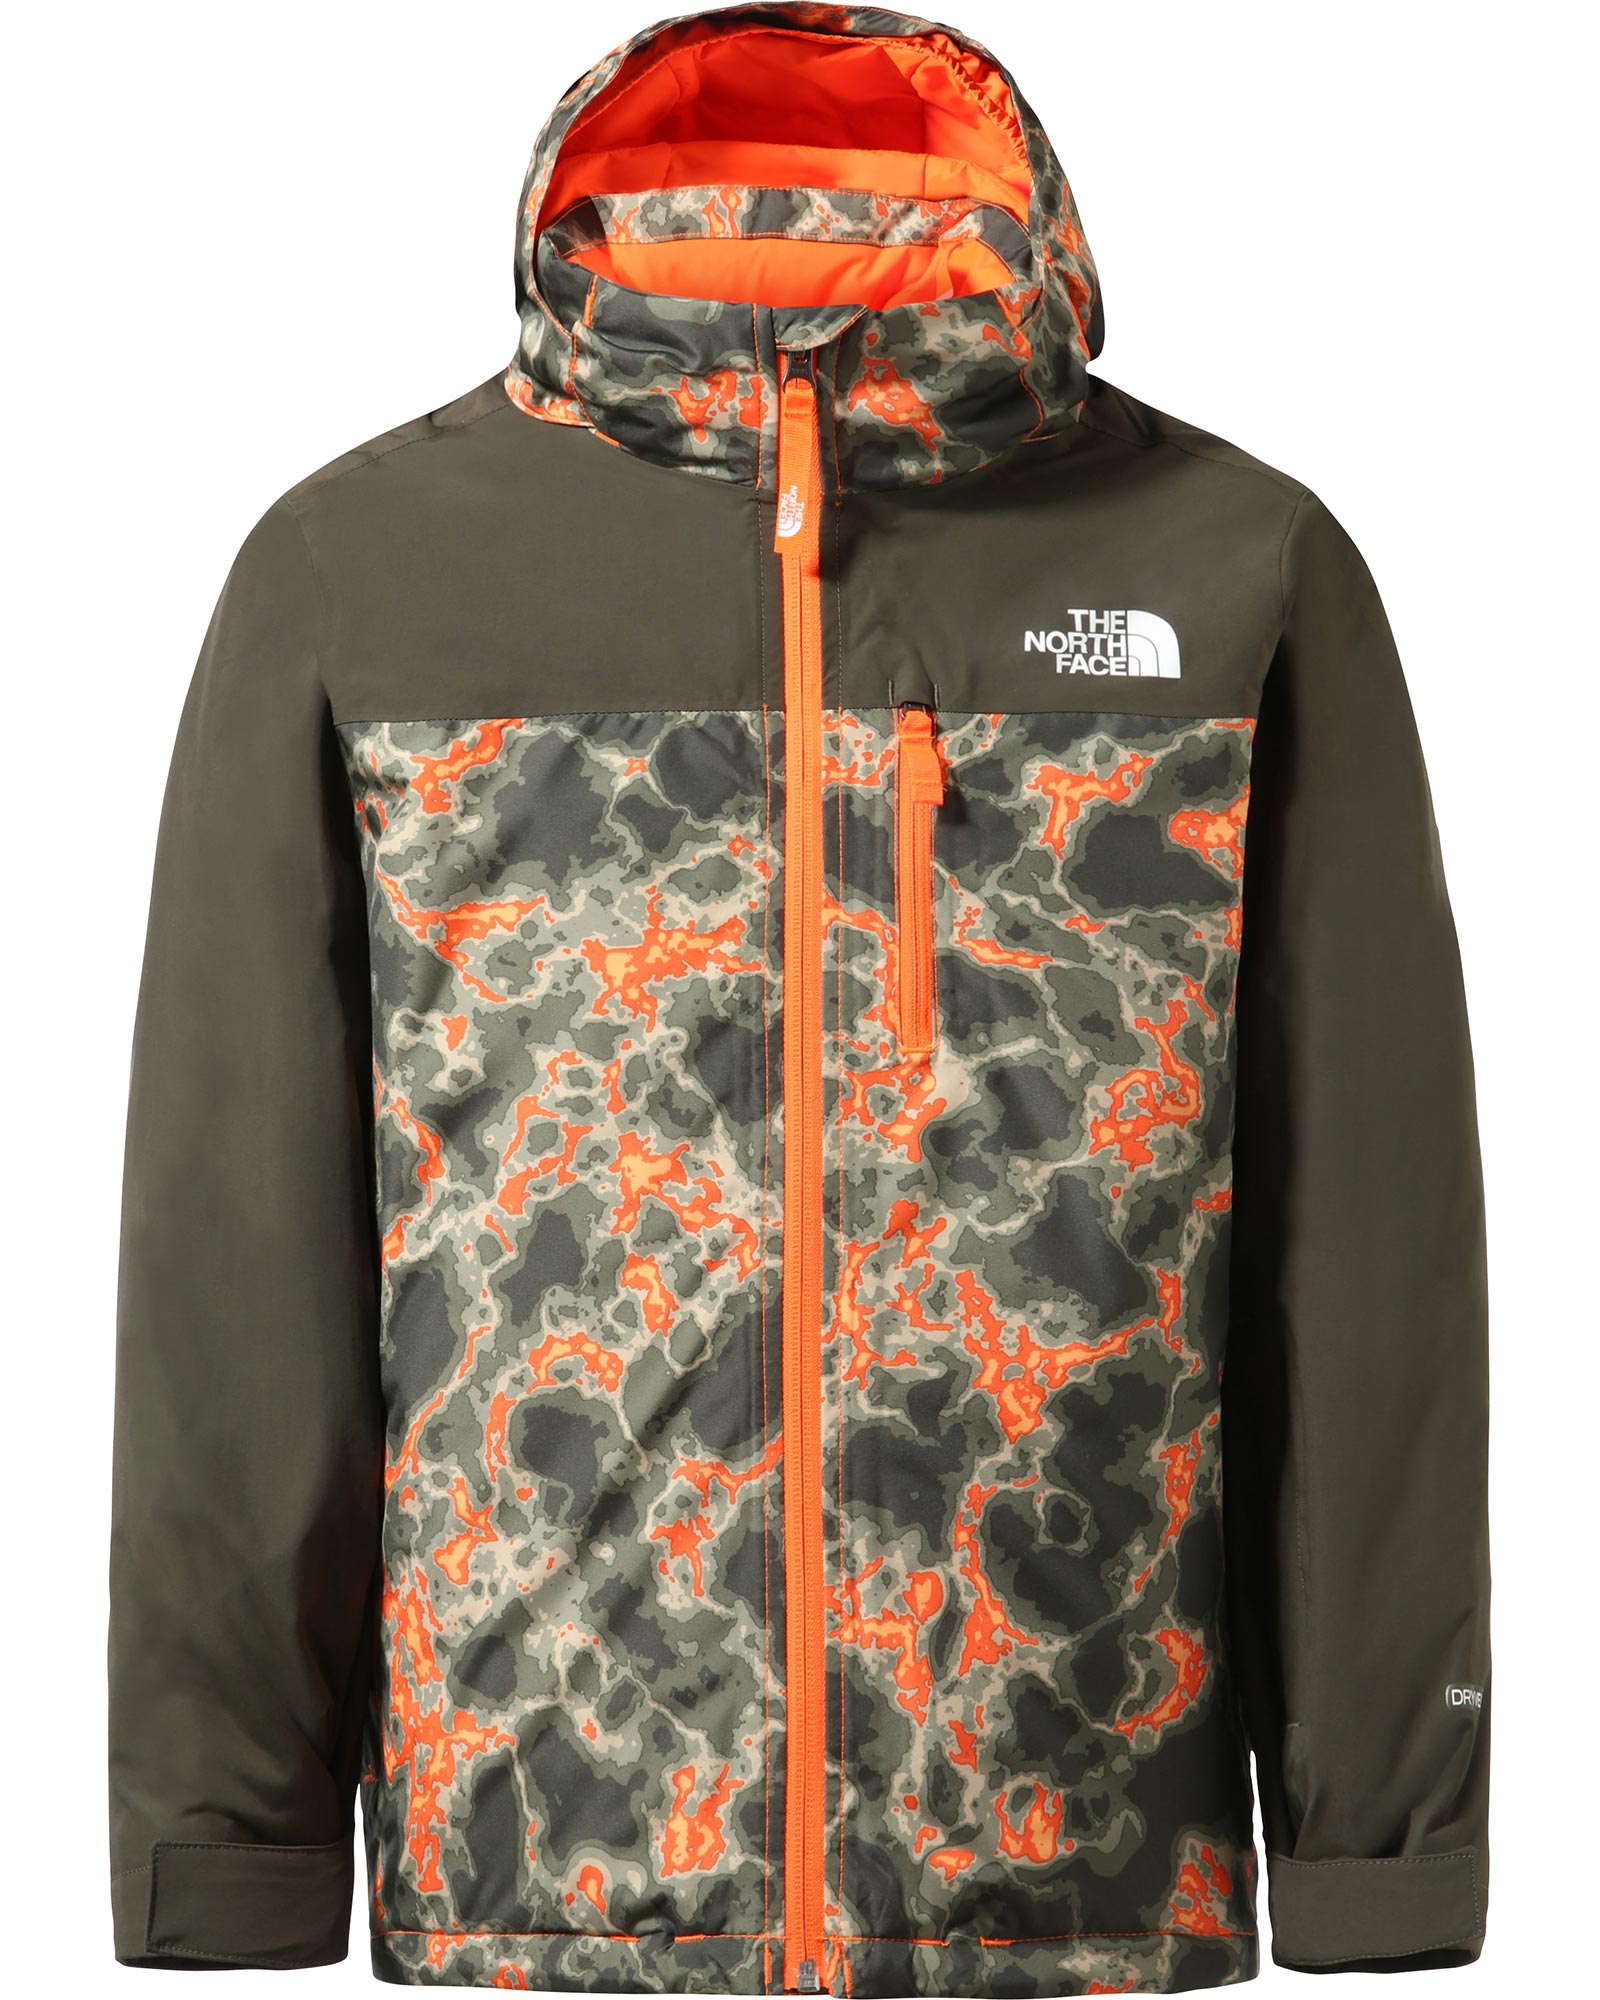 The North Face Snowquest Plus Kids’ Insulated Jacket - Power Orange Marble Camo Print XS